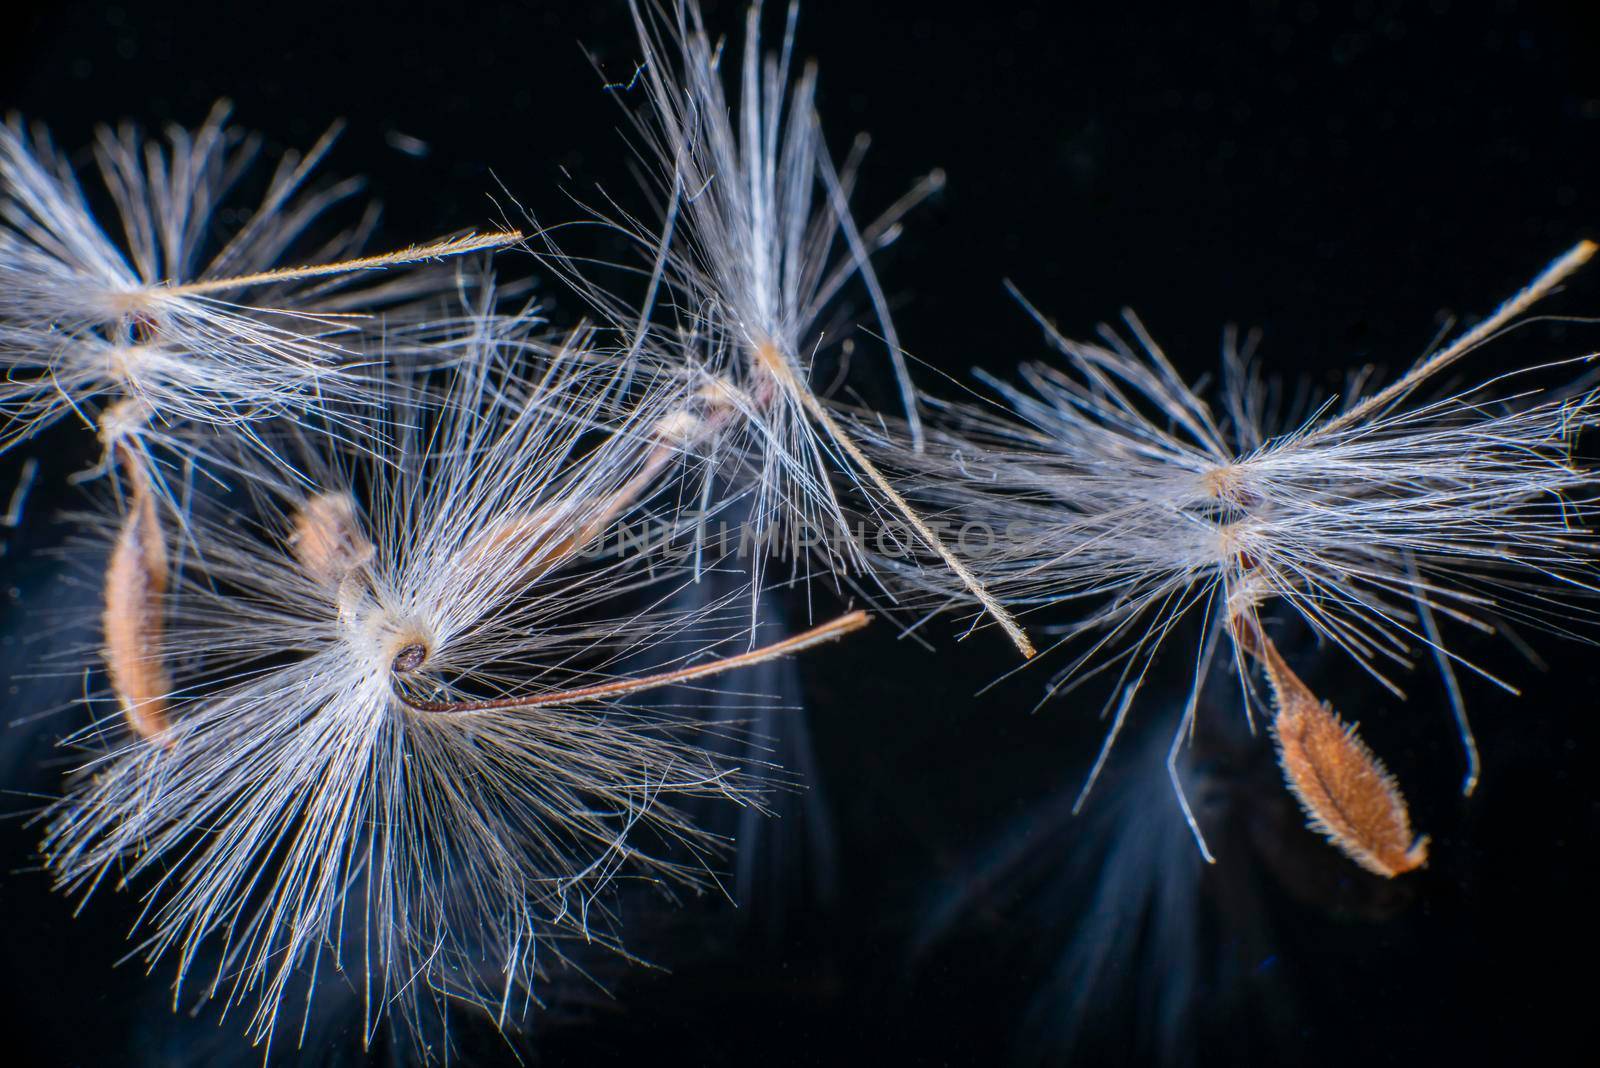 Brightly lit Pelargonium seeds, with fluffy hairs and a spiral body, are reflected in black perspex. Geranium seeds that look like ballerina ballet dancers. Motes of dust shine in the background like a constellation of stars. High quality photo